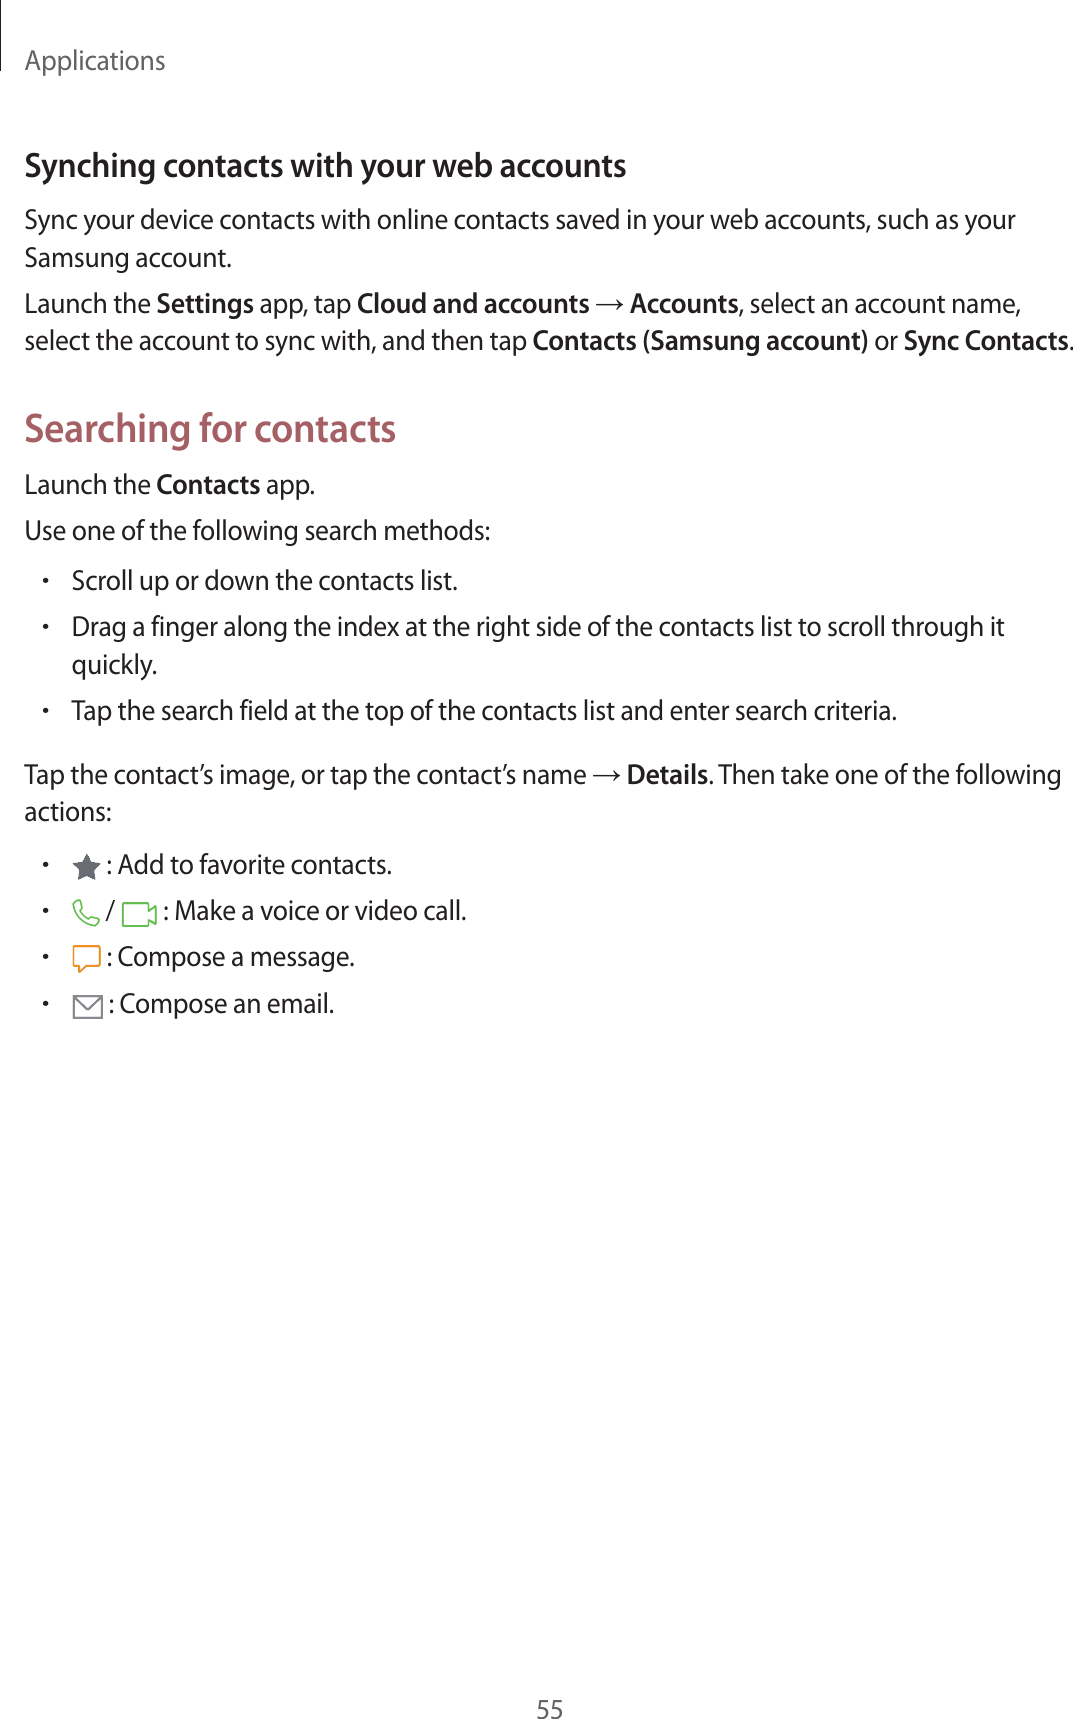 Applications55Synching contacts with your web accountsSync your device contacts with online contacts saved in your web accounts, such as your Samsung account.Launch the Settings app, tap Cloud and accounts → Accounts, select an account name, select the account to sync with, and then tap Contacts (Samsung account) or Sync Contacts.Searching for contactsLaunch the Contacts app.Use one of the following search methods:•Scroll up or down the contacts list.•Drag a finger along the index at the right side of the contacts list to scroll through it quickly.•Tap the search field at the top of the contacts list and enter search criteria.Tap the contact’s image, or tap the contact’s name → Details. Then take one of the following actions:• : Add to favorite contacts.• /   : Make a voice or video call.• : Compose a message.• : Compose an email.